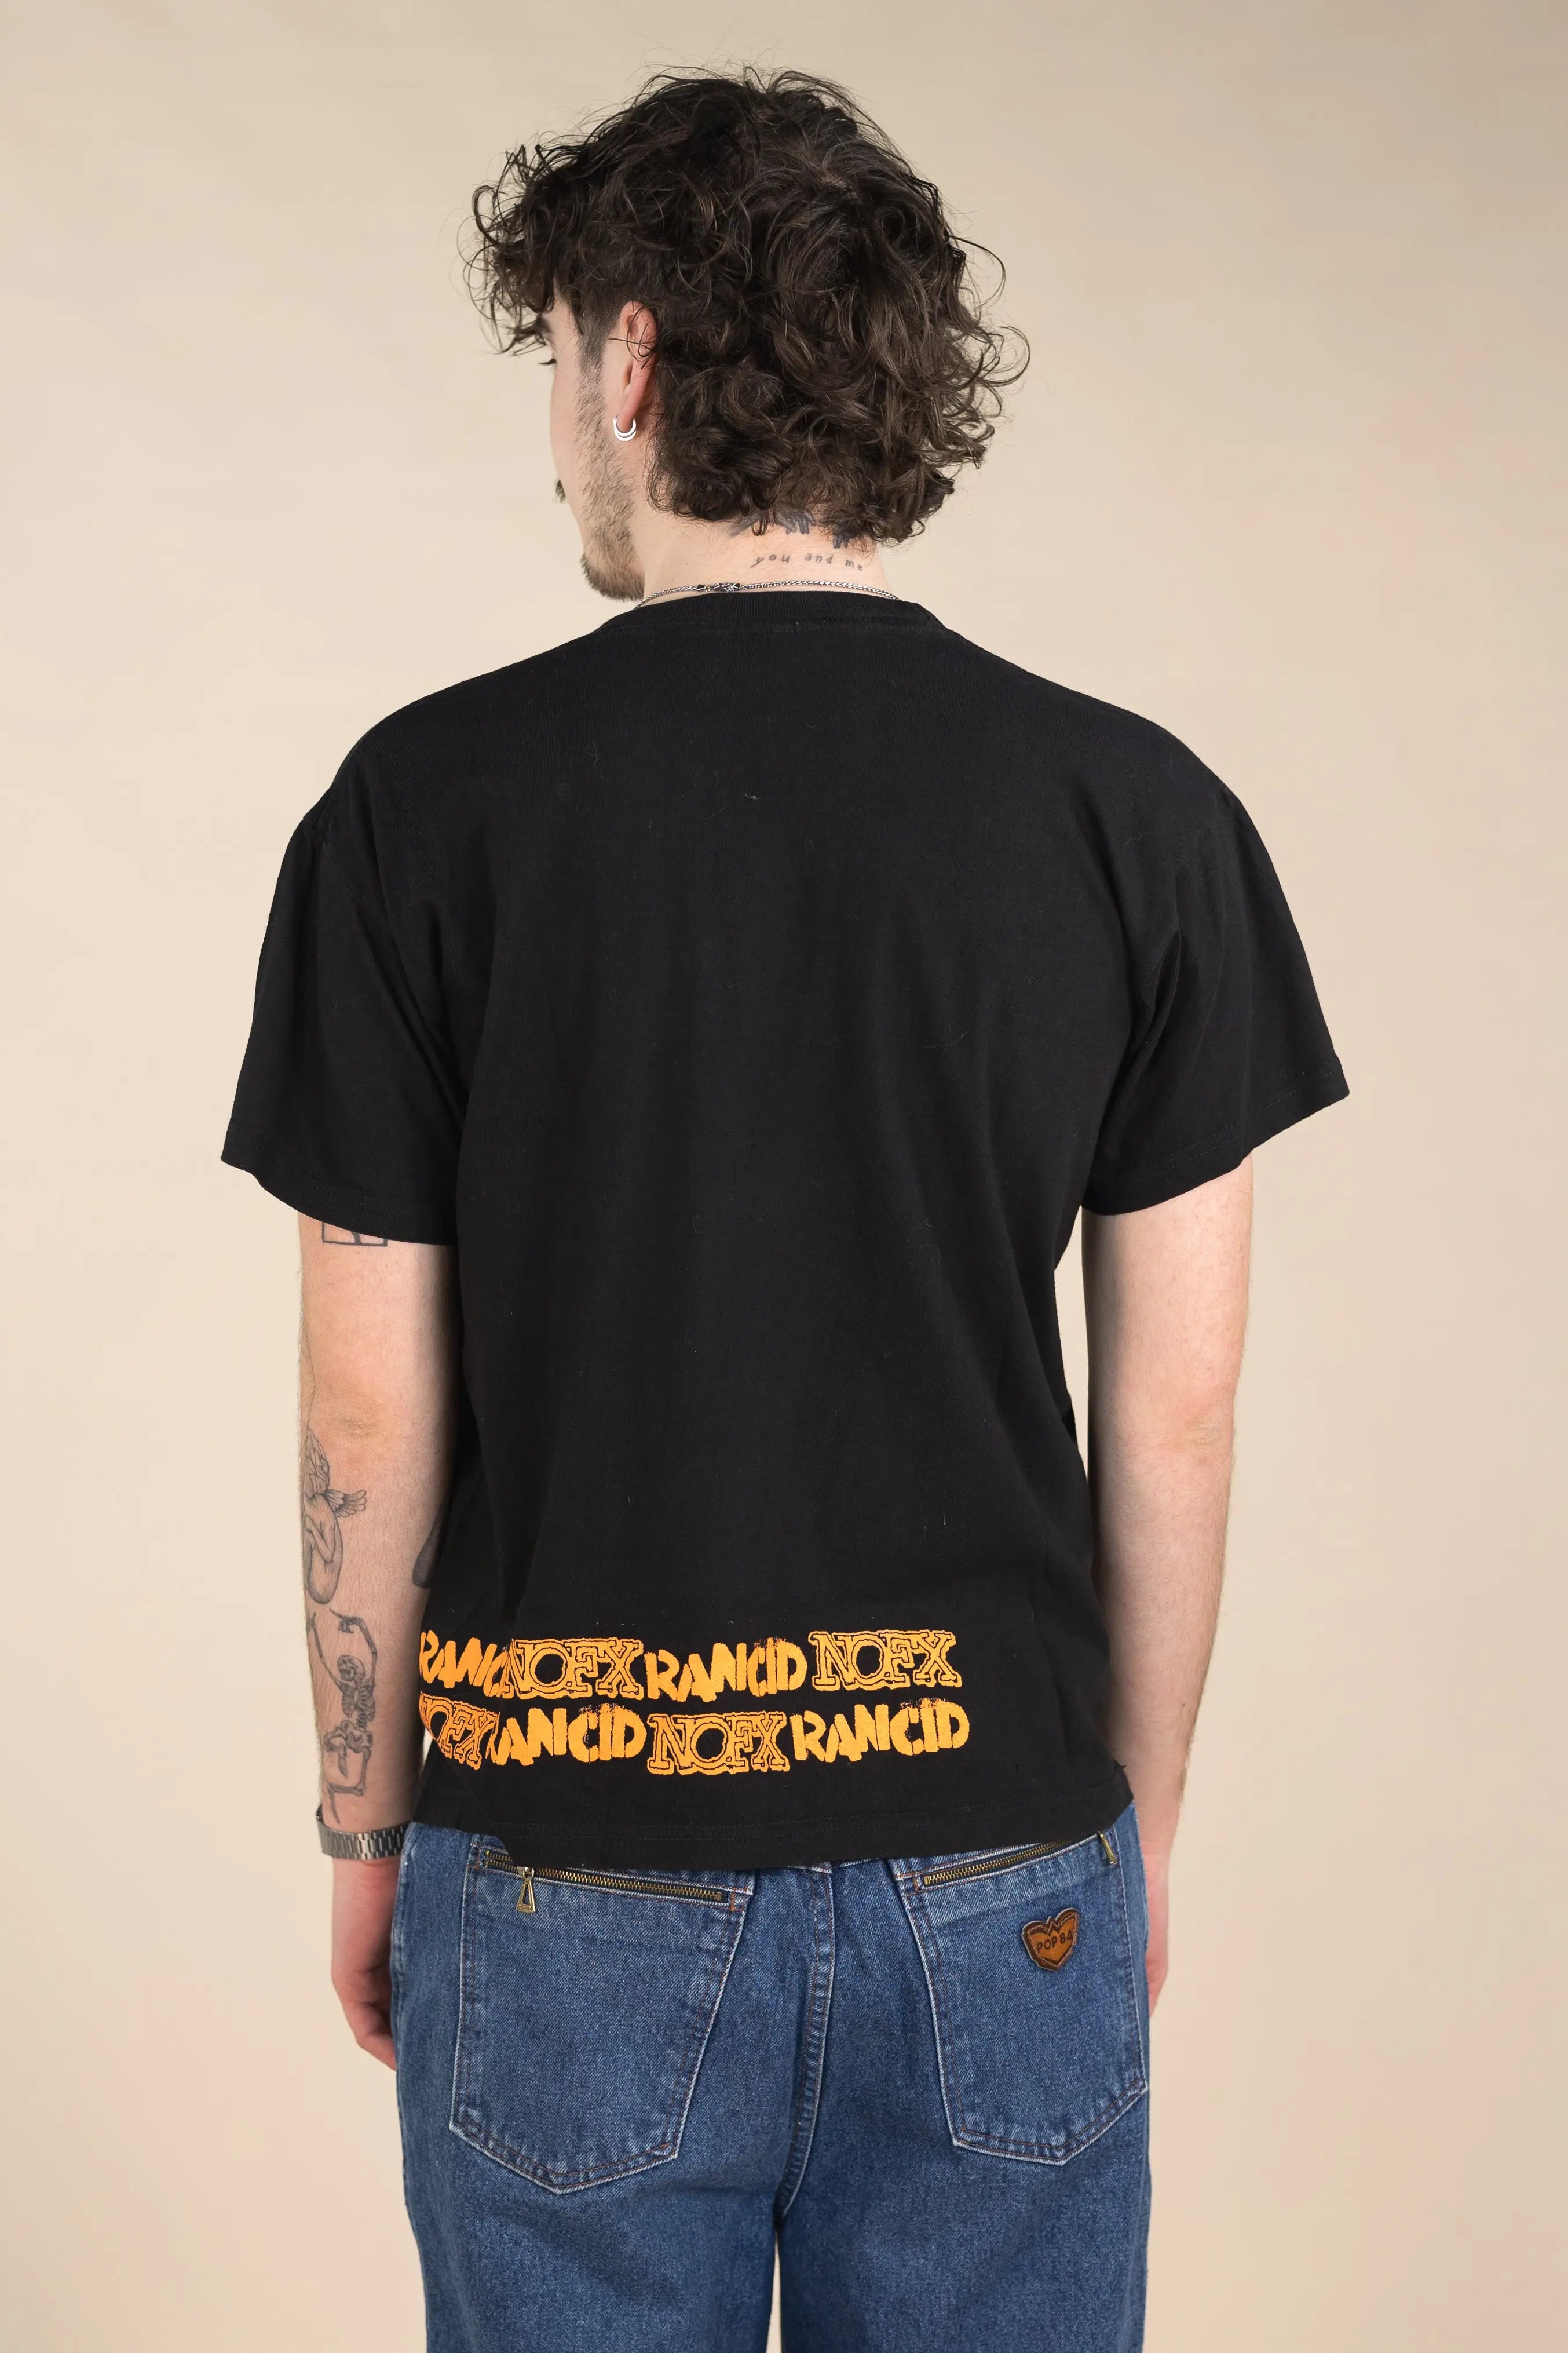 Rancid - Printed T-Shirt- ThriftTale.com - Vintage and second handclothing